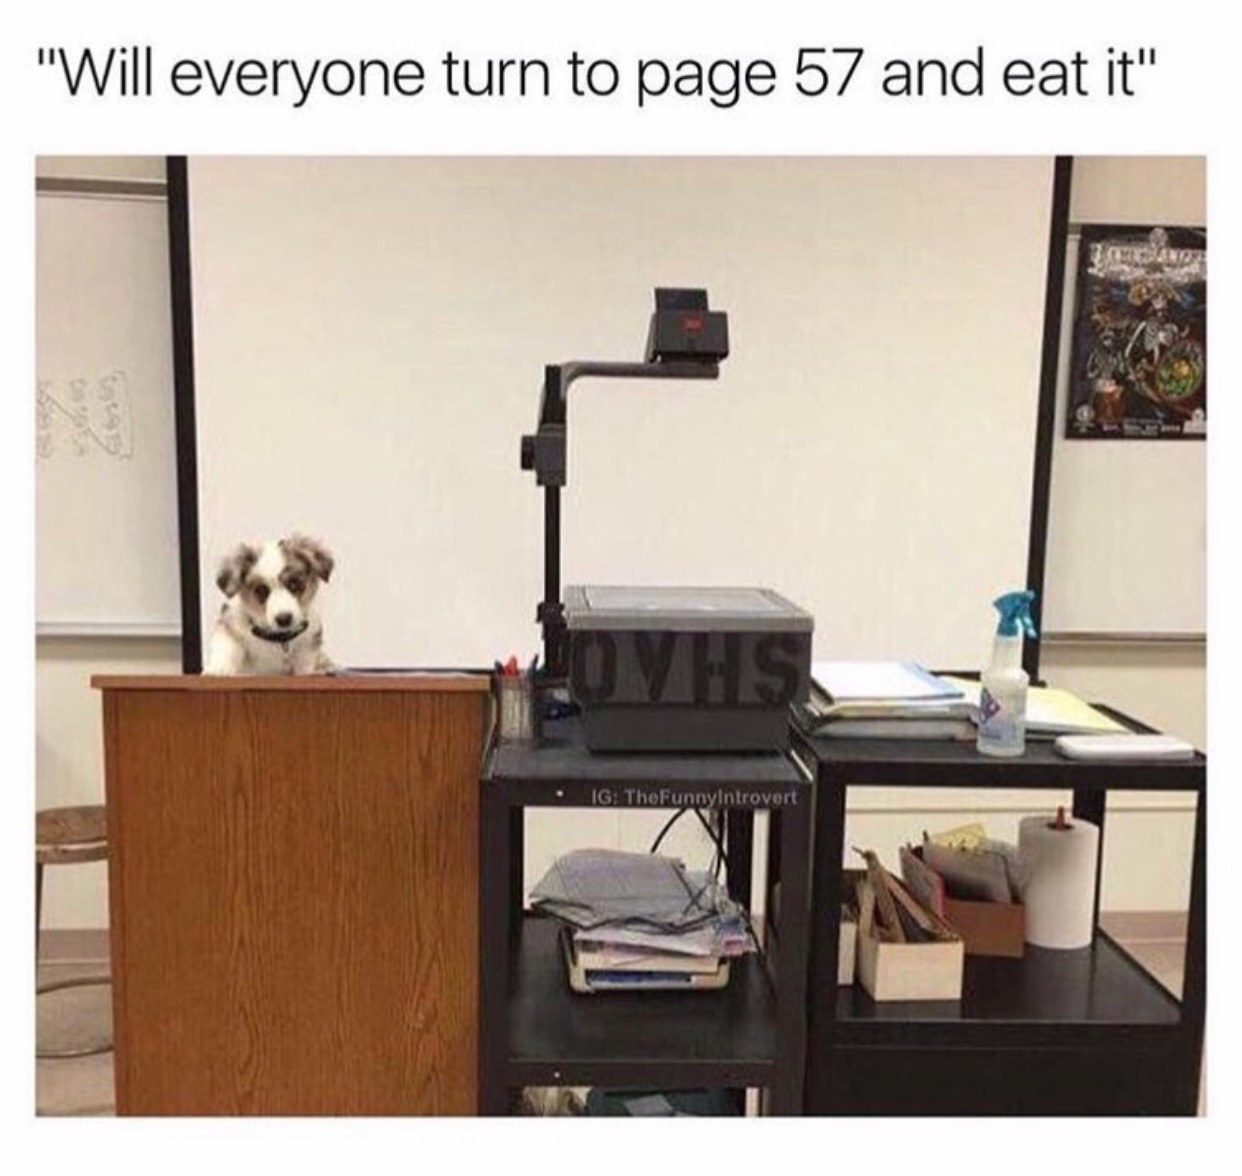 will everyone turn to page 57 and eat it - "Will everyone turn to page 57 and eat it" Ig TheFunnyIntrovert